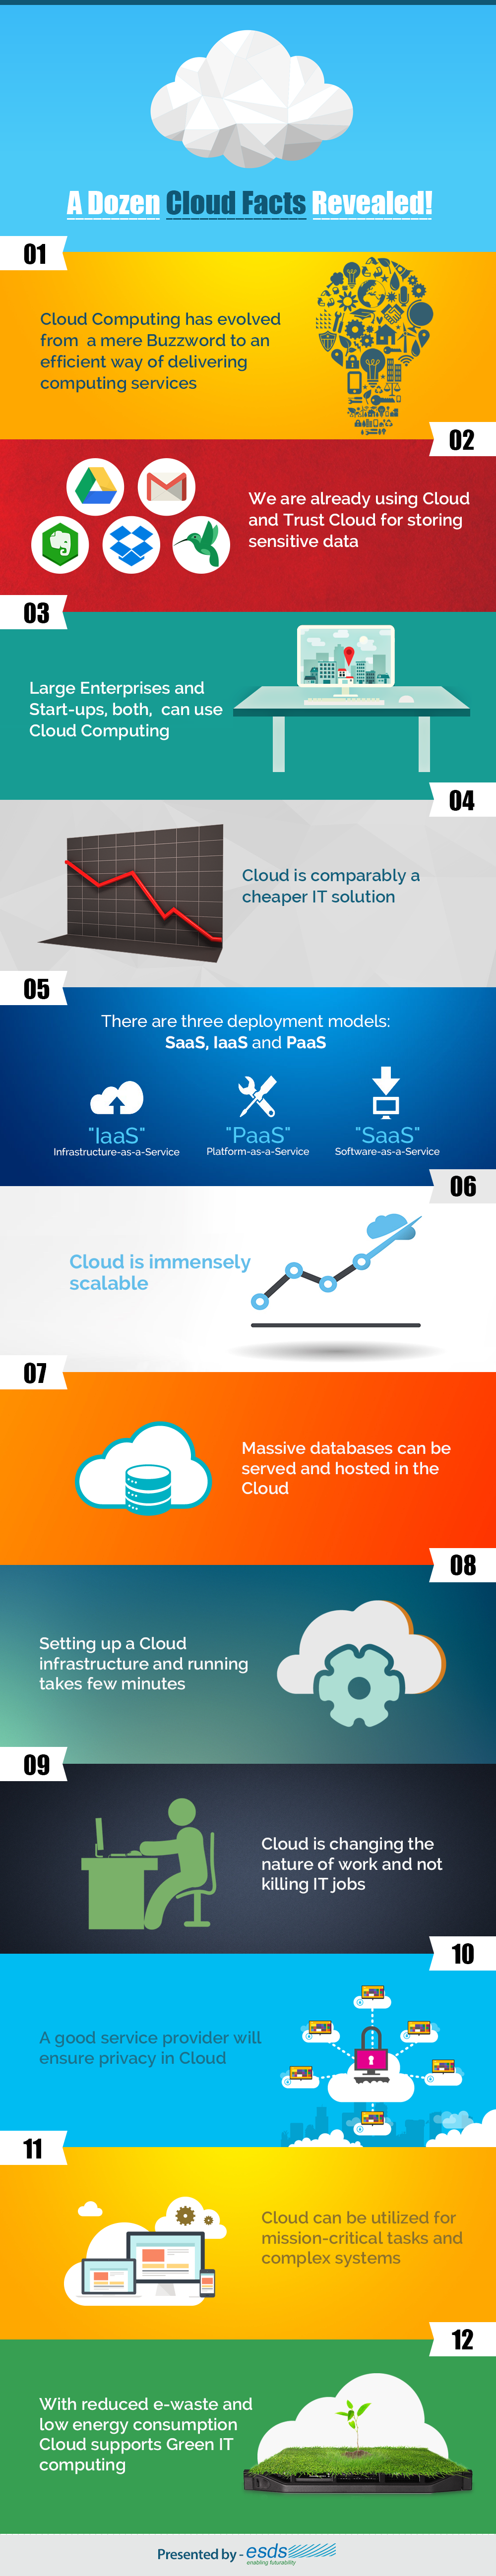 cloud-facts-infographic